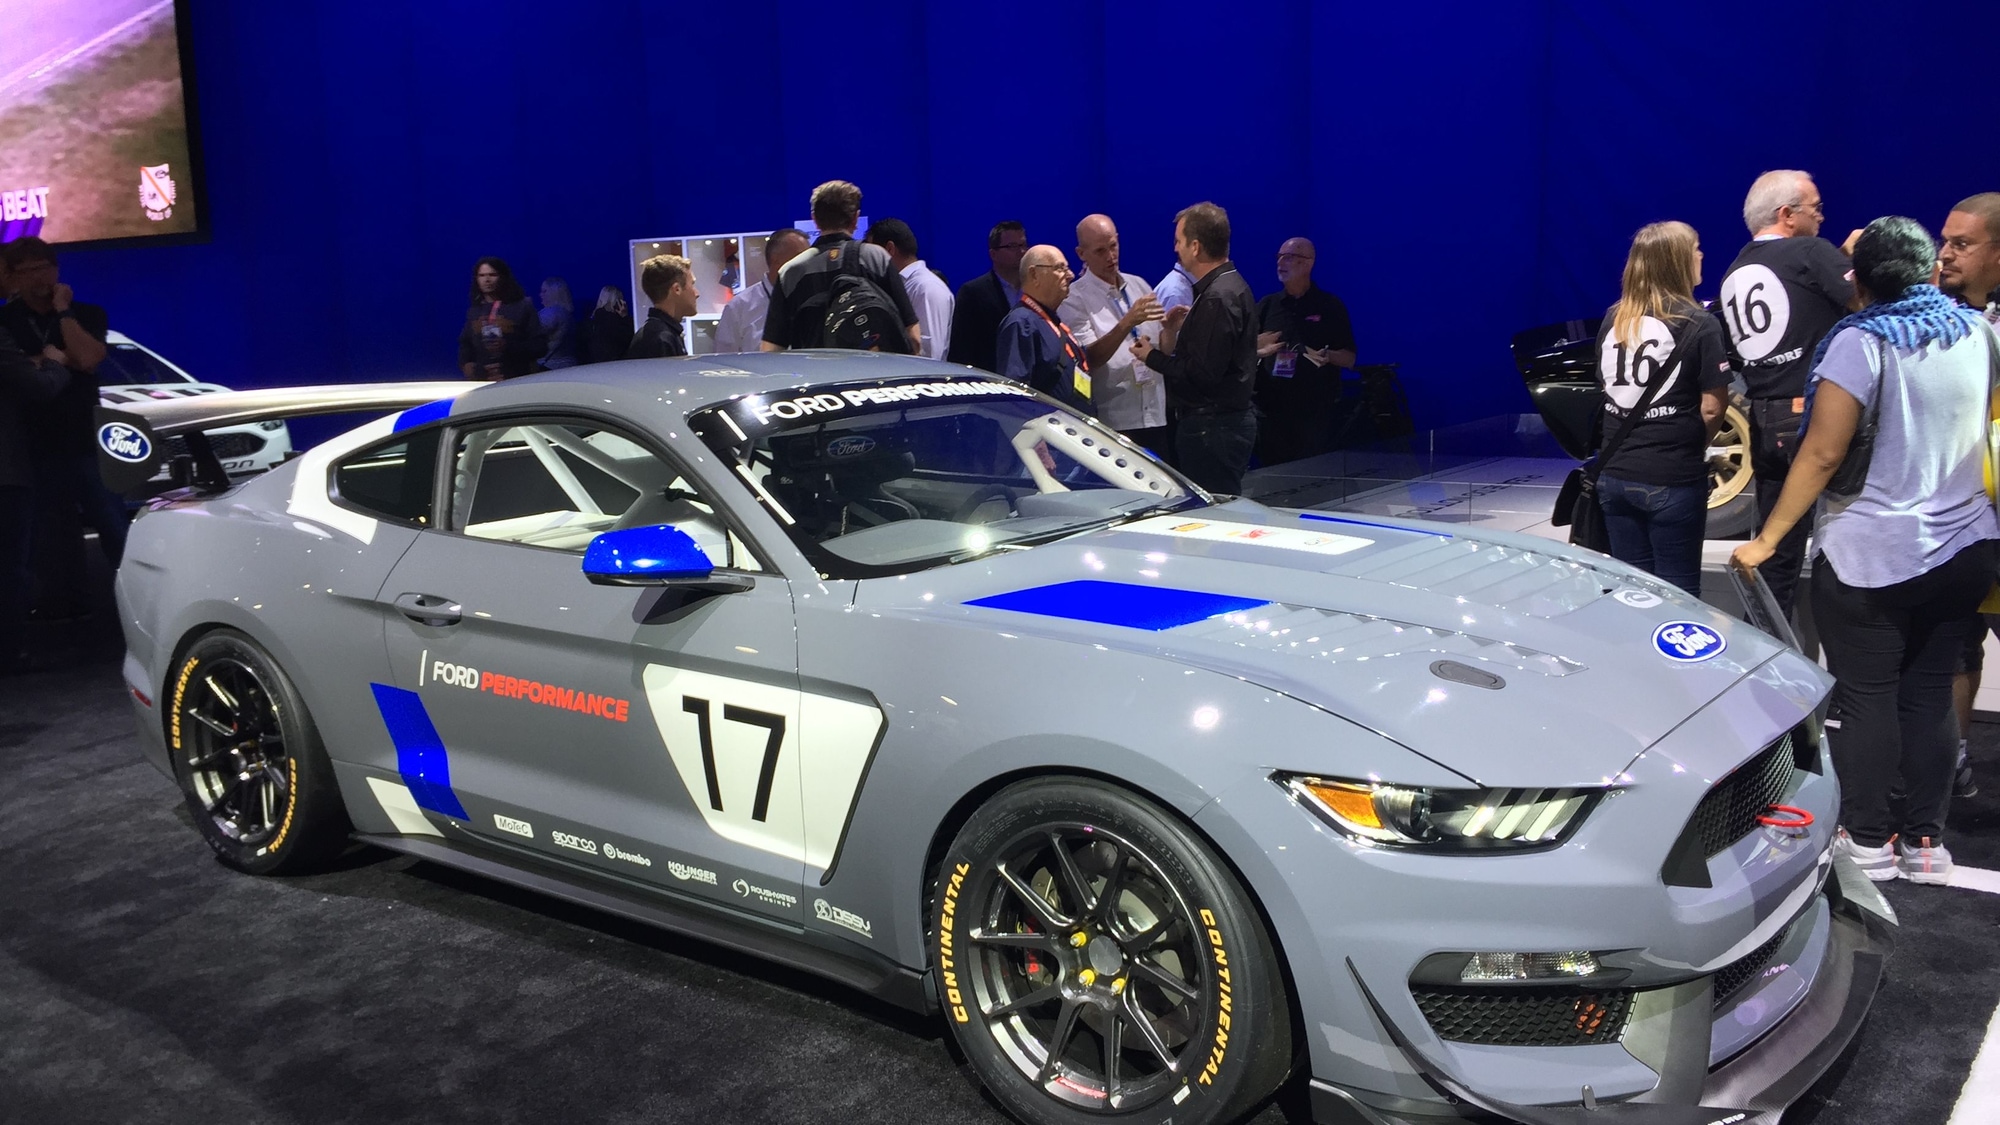 2017 Ford Mustang GT4 race car, 2016 SEMA show